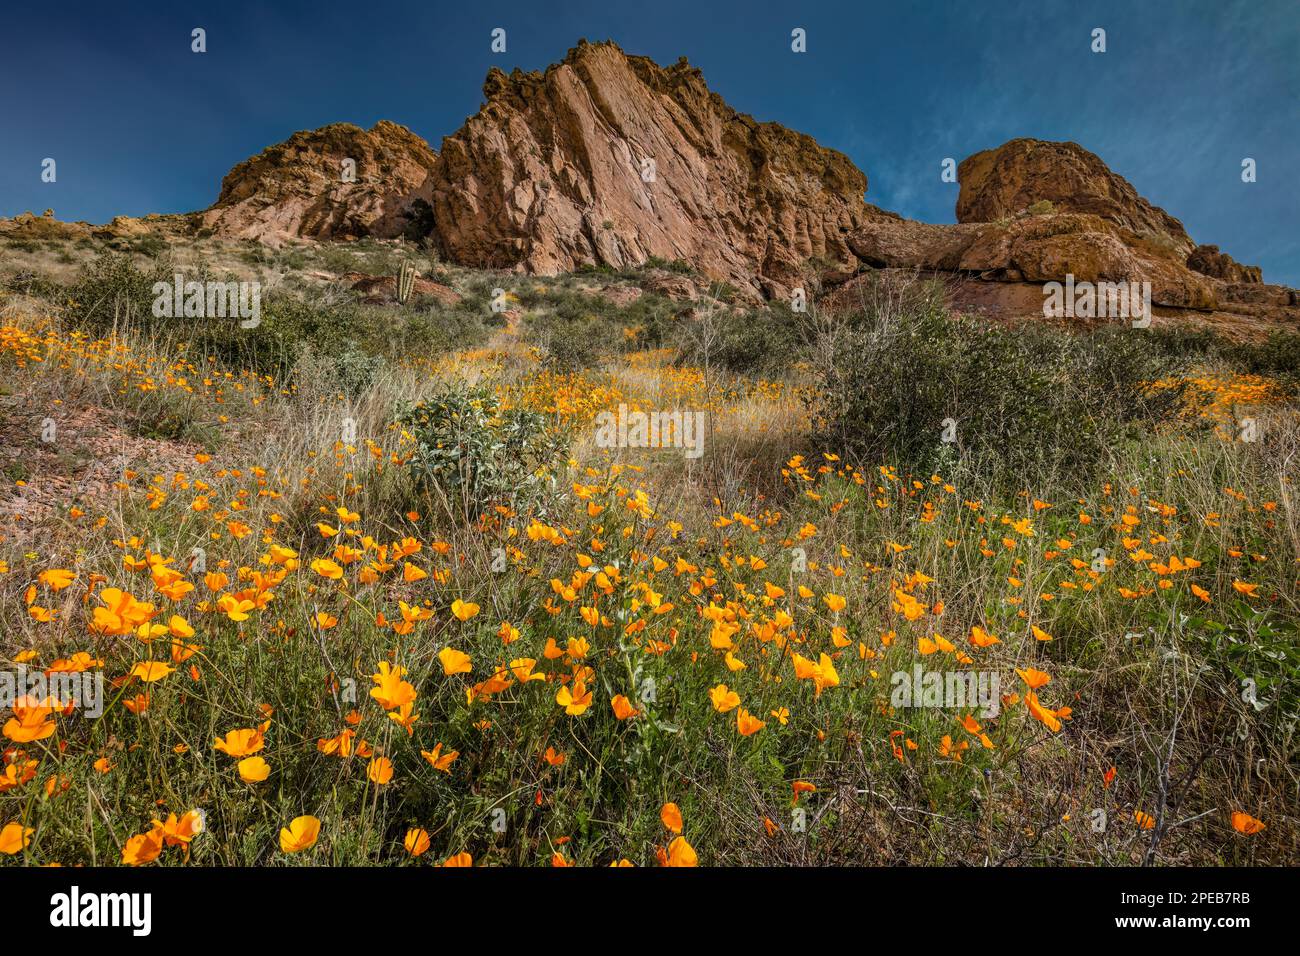 Poppies mexicaines, Eschscholzia californica, Organ Pipe Cactus National Monument, Arizona Banque D'Images